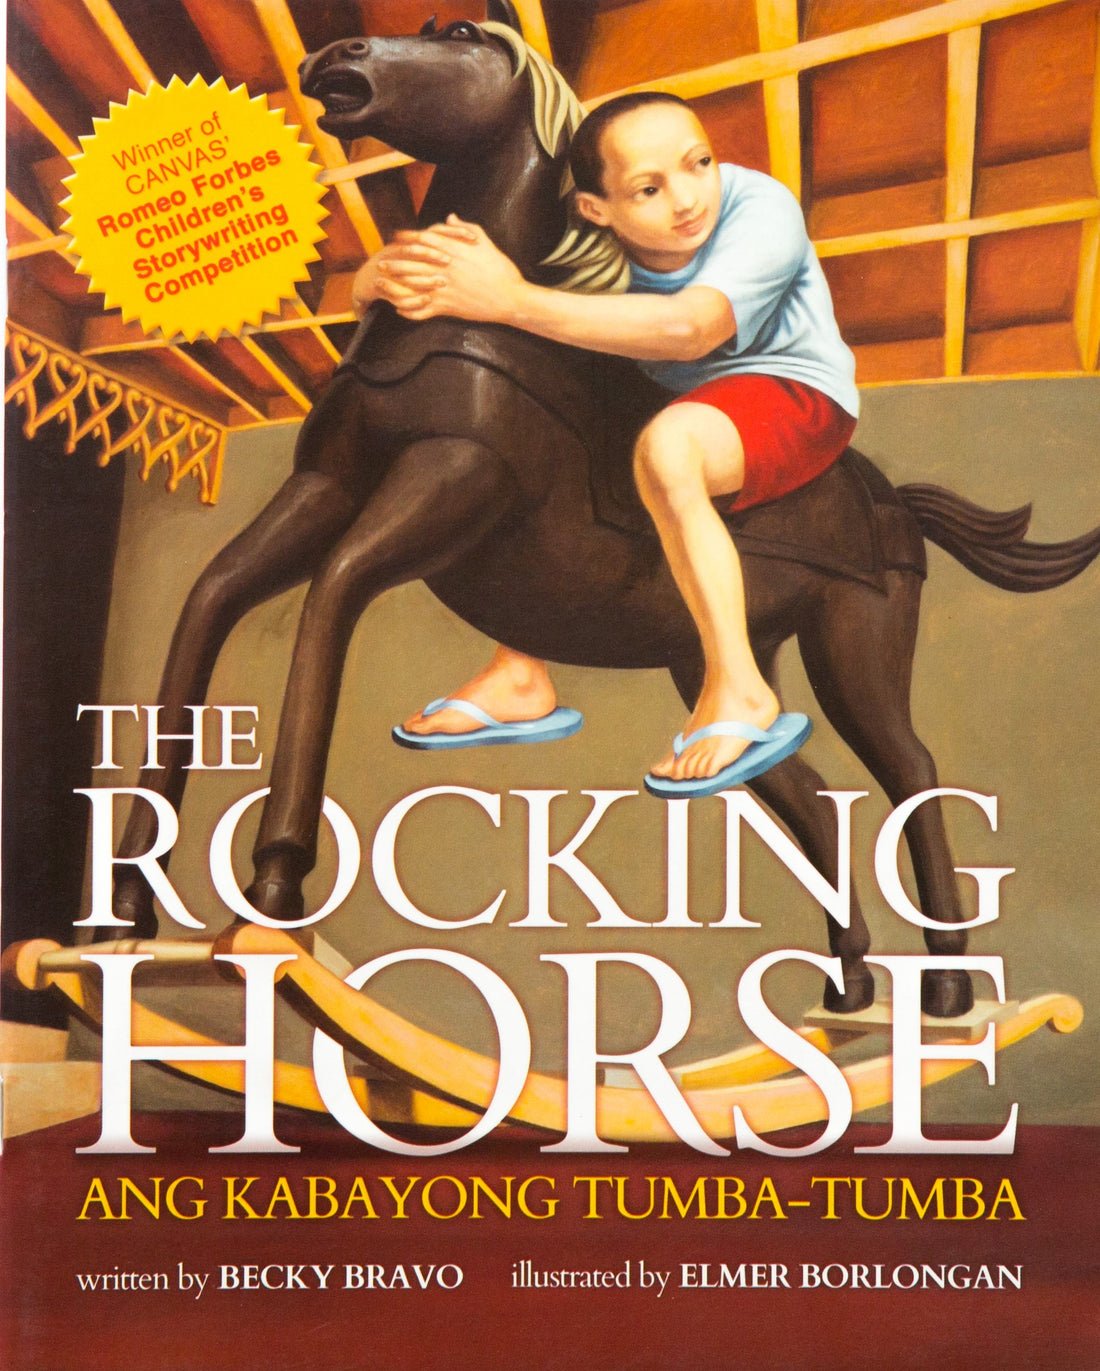 The Rocking Horse (Softbound Edition)